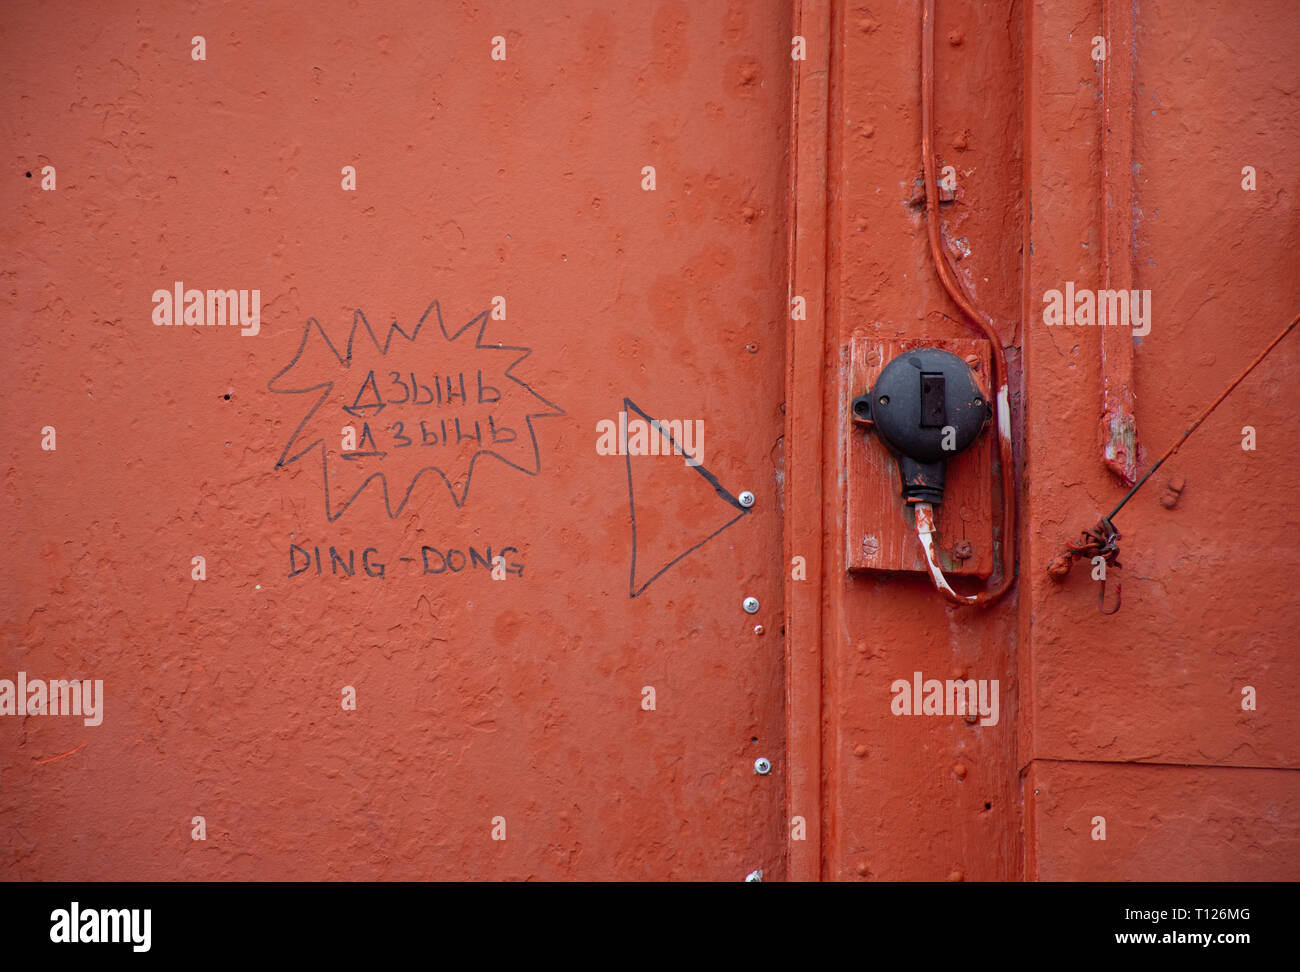 A door bell on a red building with ding dong written on the wall. Stock Photo